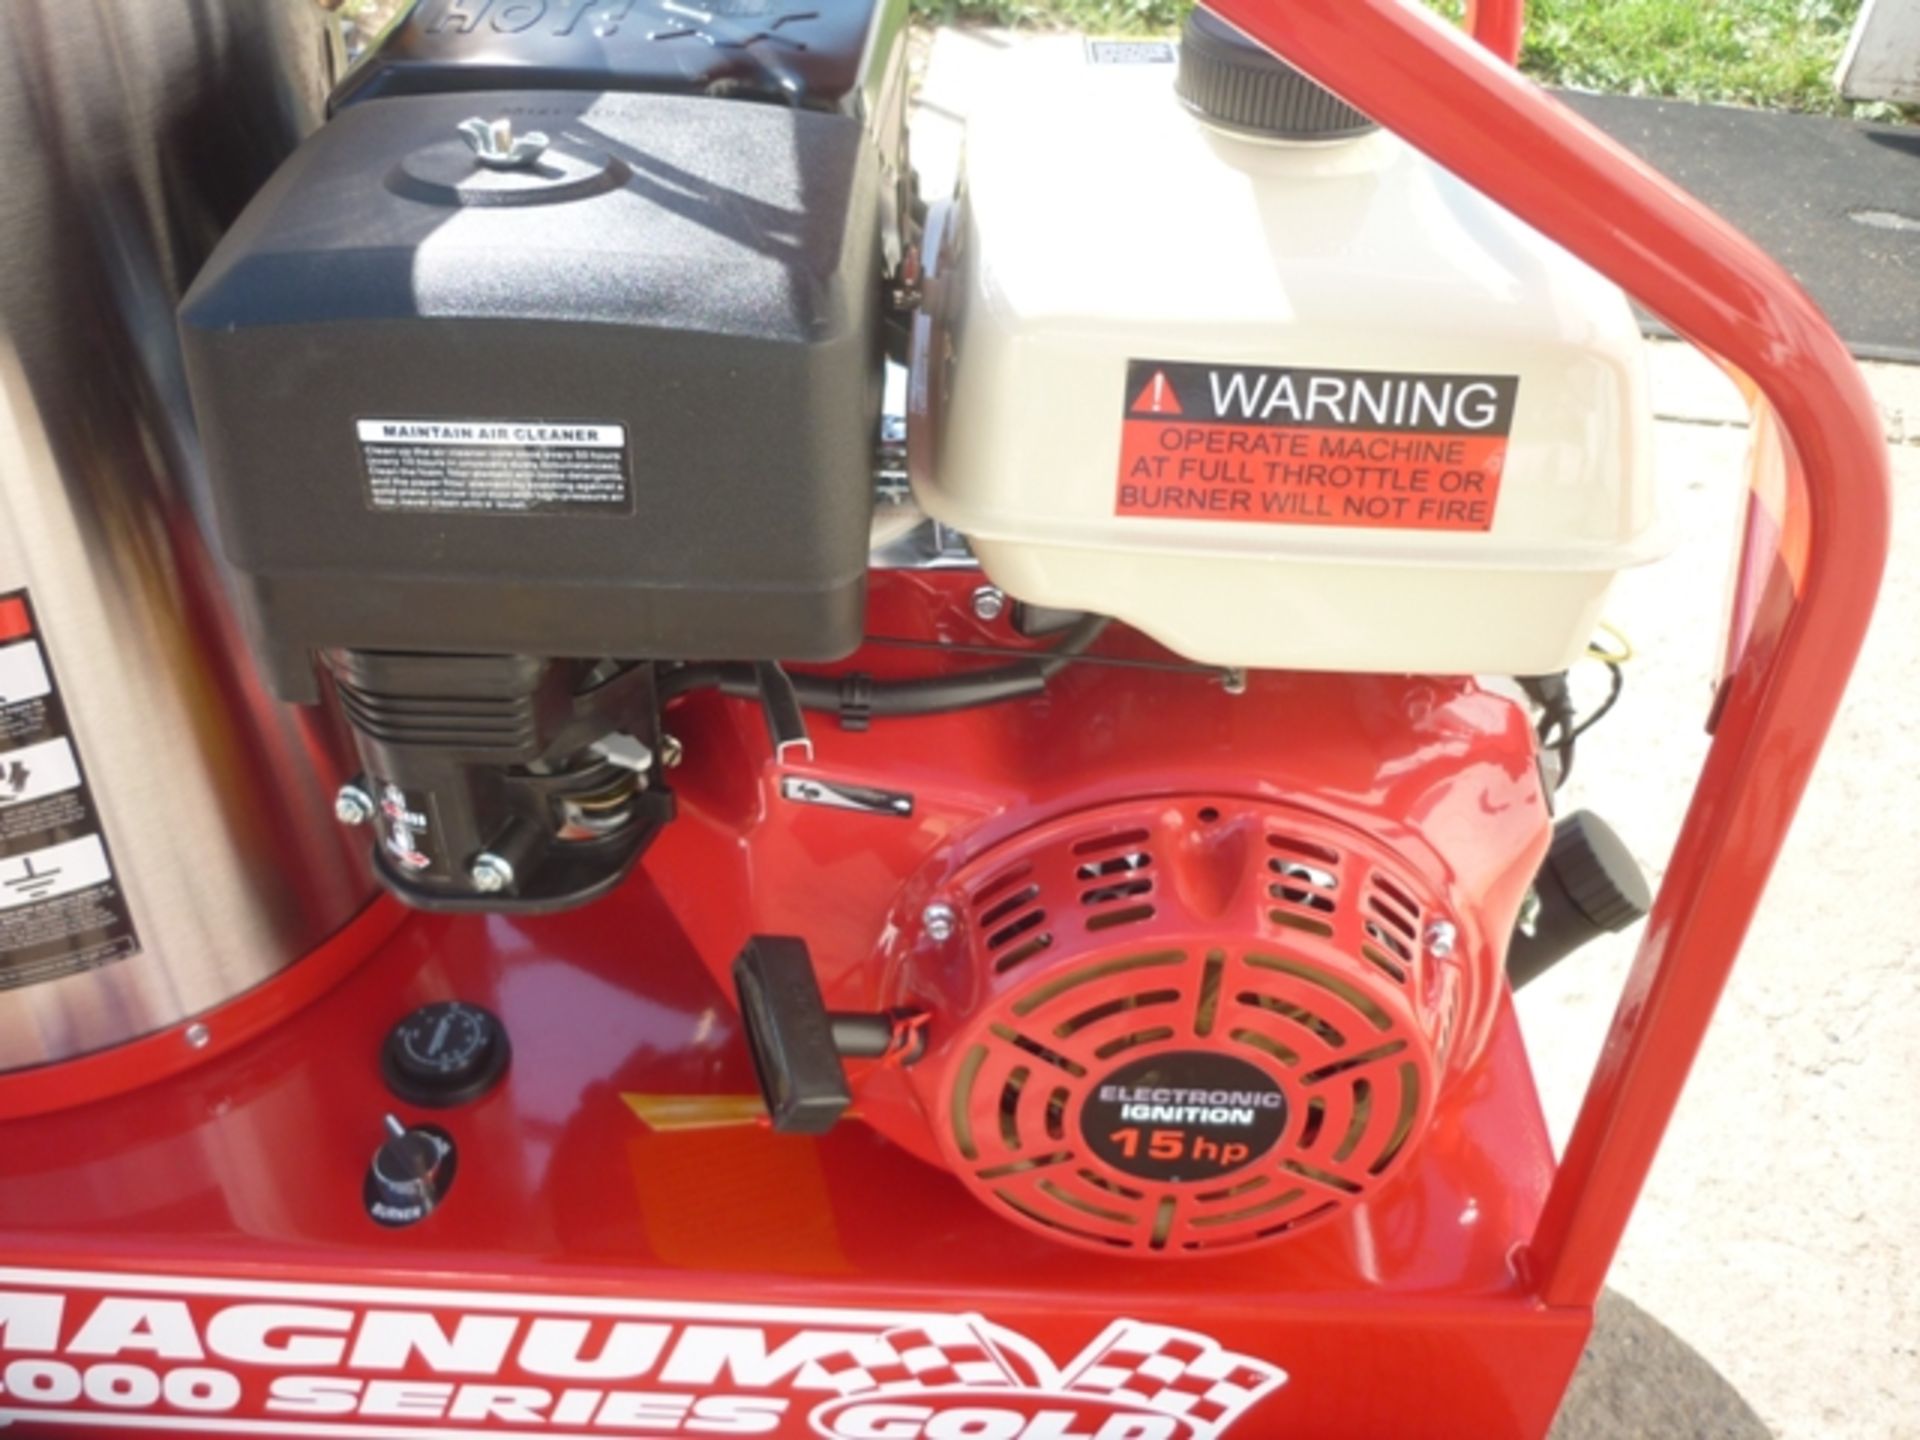 2020 EASY KLEEN MAGNUM 4000 GOLD HOT WATER PRESSURE WASHER W/GAS ENGINE, S/N 1948131 - Image 4 of 5